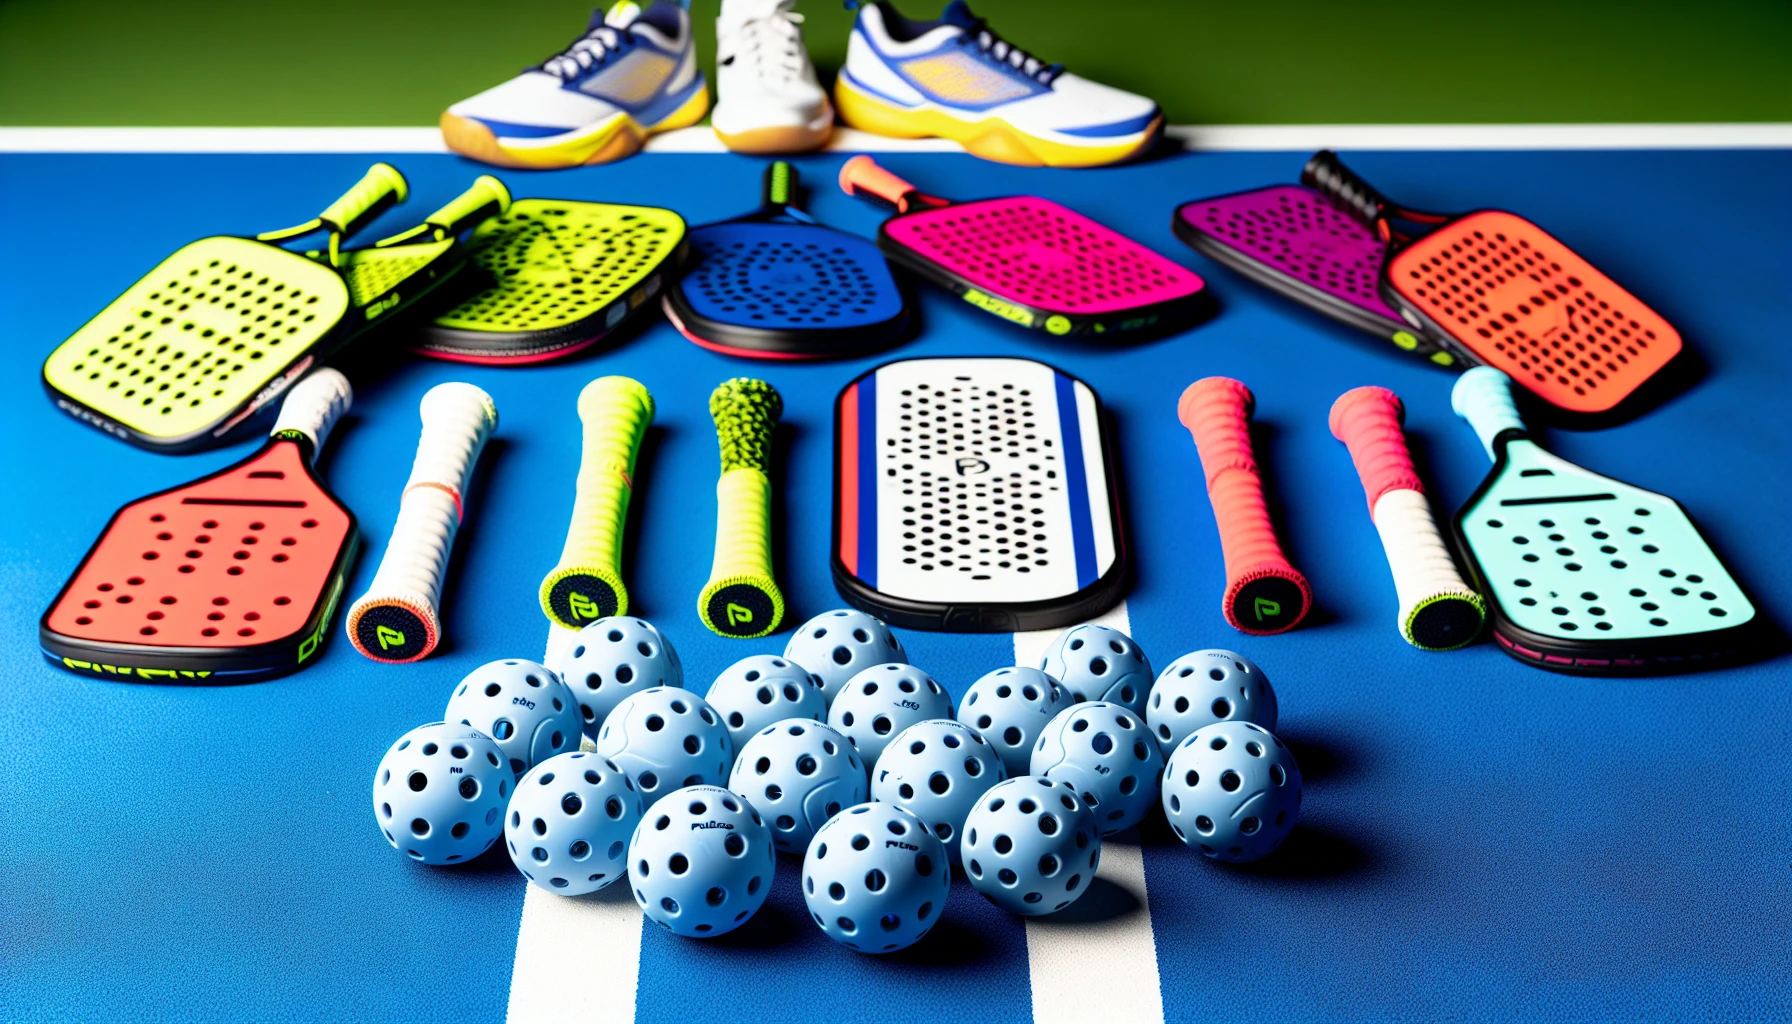 Assorted pickleball gear featuring paddles, balls, and court shoes for the ultimate playing experience.